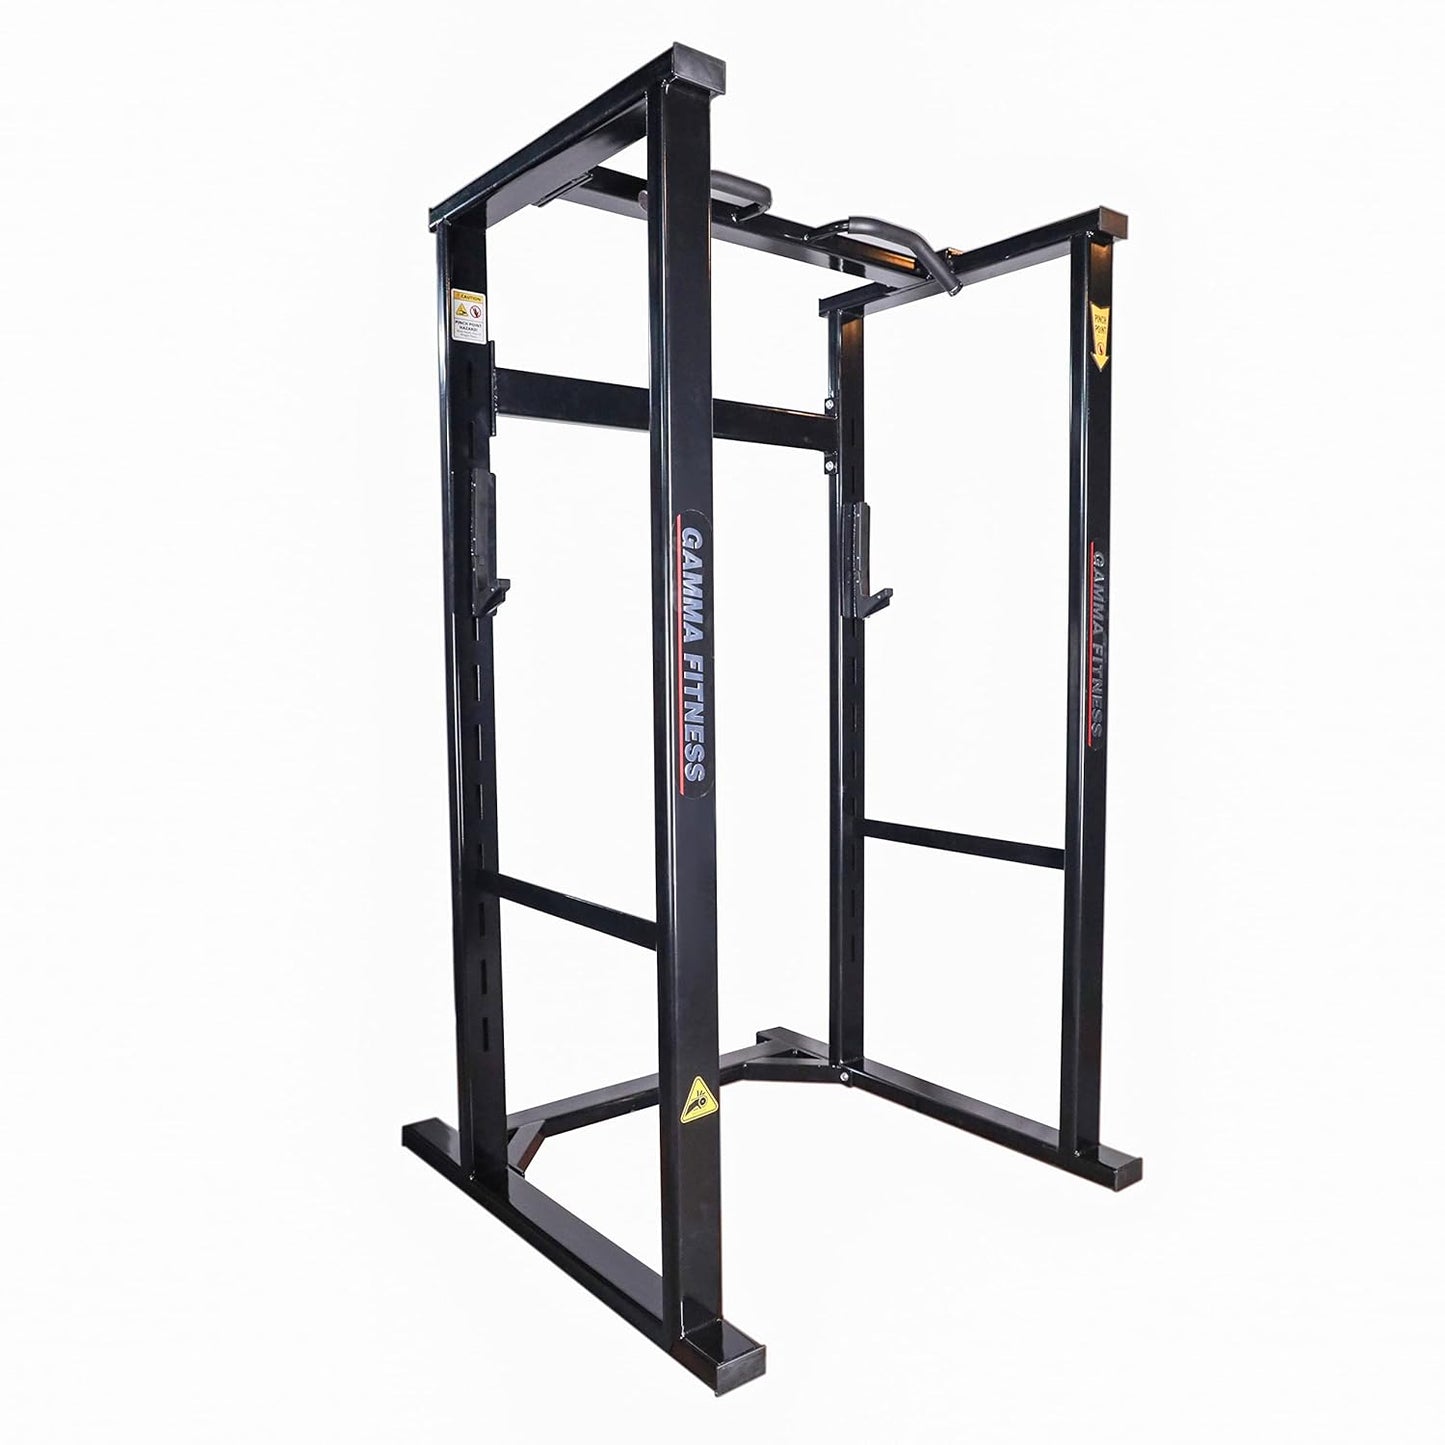 Gamma Fitness Power Squat Rack PR-09 Pro for Commercial or Home Gym Purpose | 4 x 2 Inches 12 gauge ISI Frame With Laser Cutting Panels & Inter-locking Mechanism | Home Gym Machine